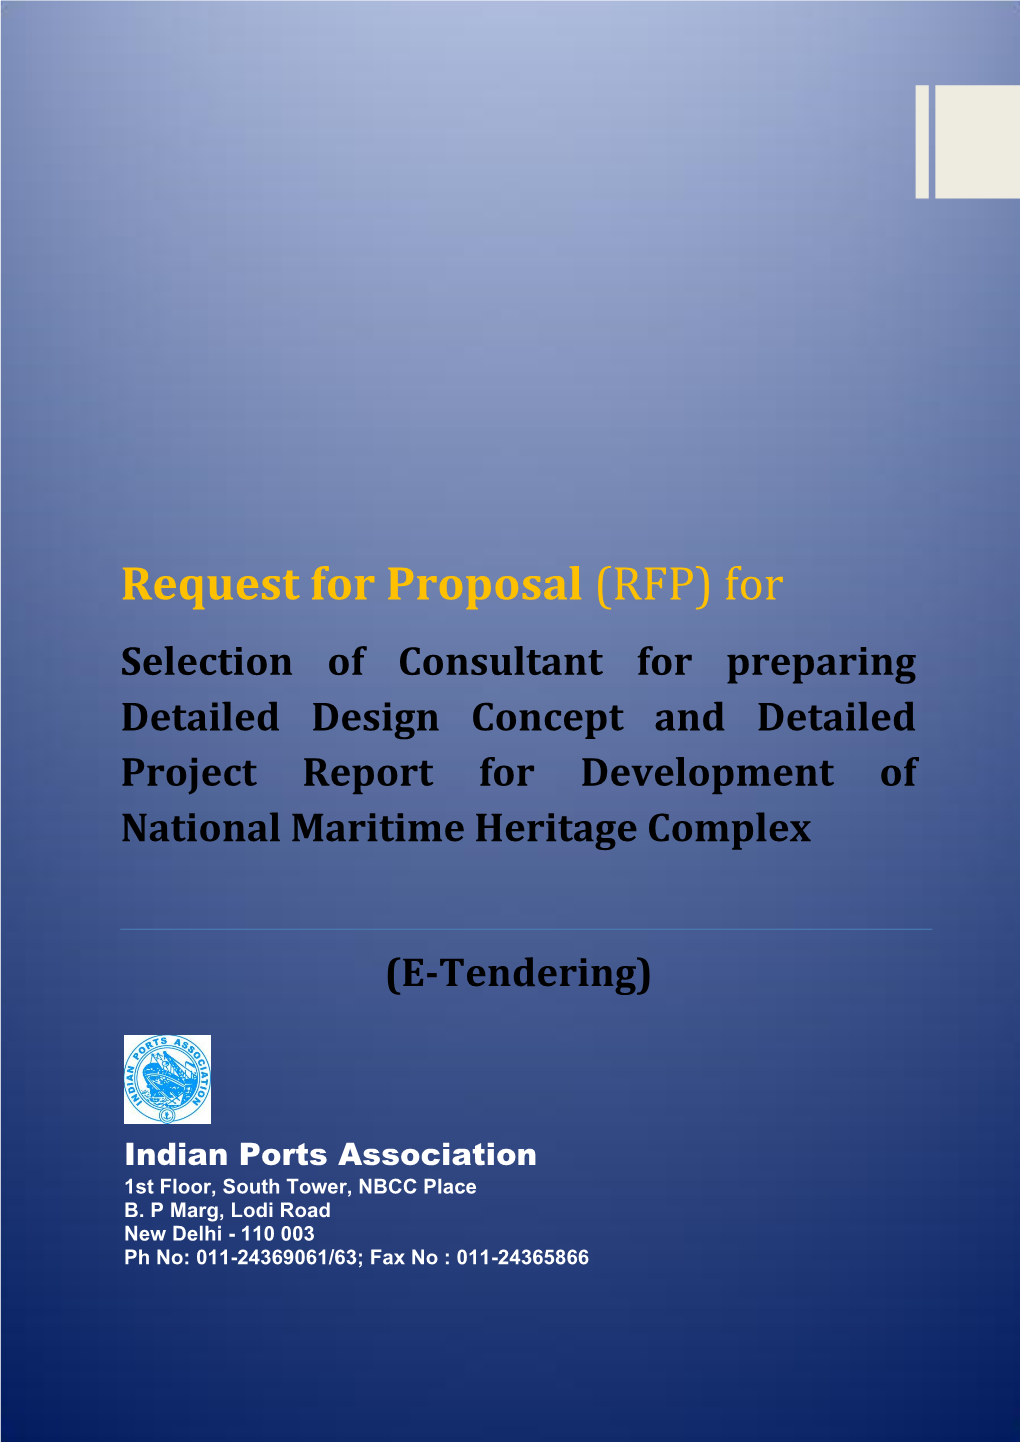 Request for Proposal (RFP) For